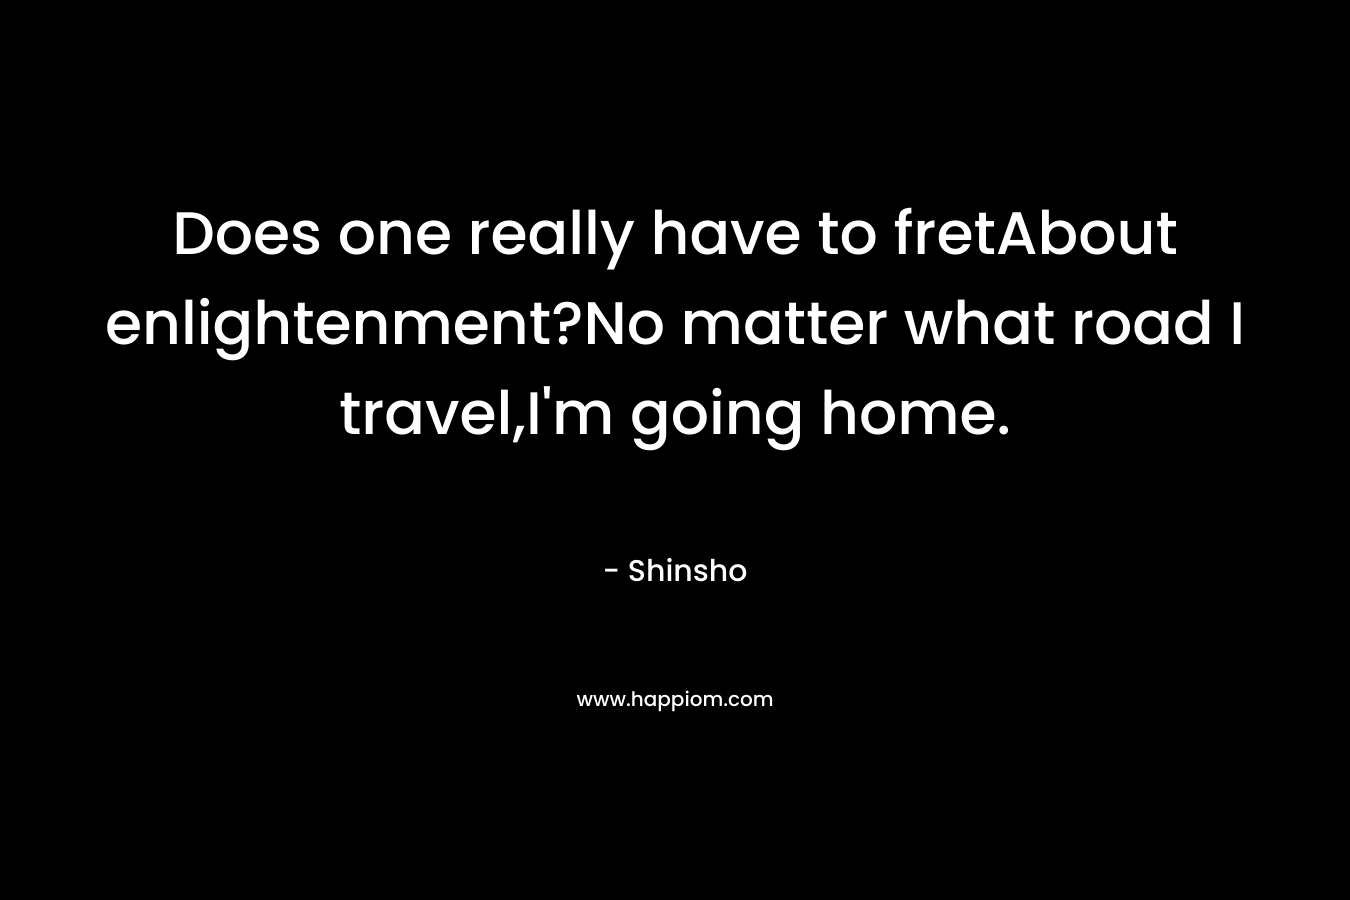 Does one really have to fretAbout enlightenment?No matter what road I travel,I'm going home.